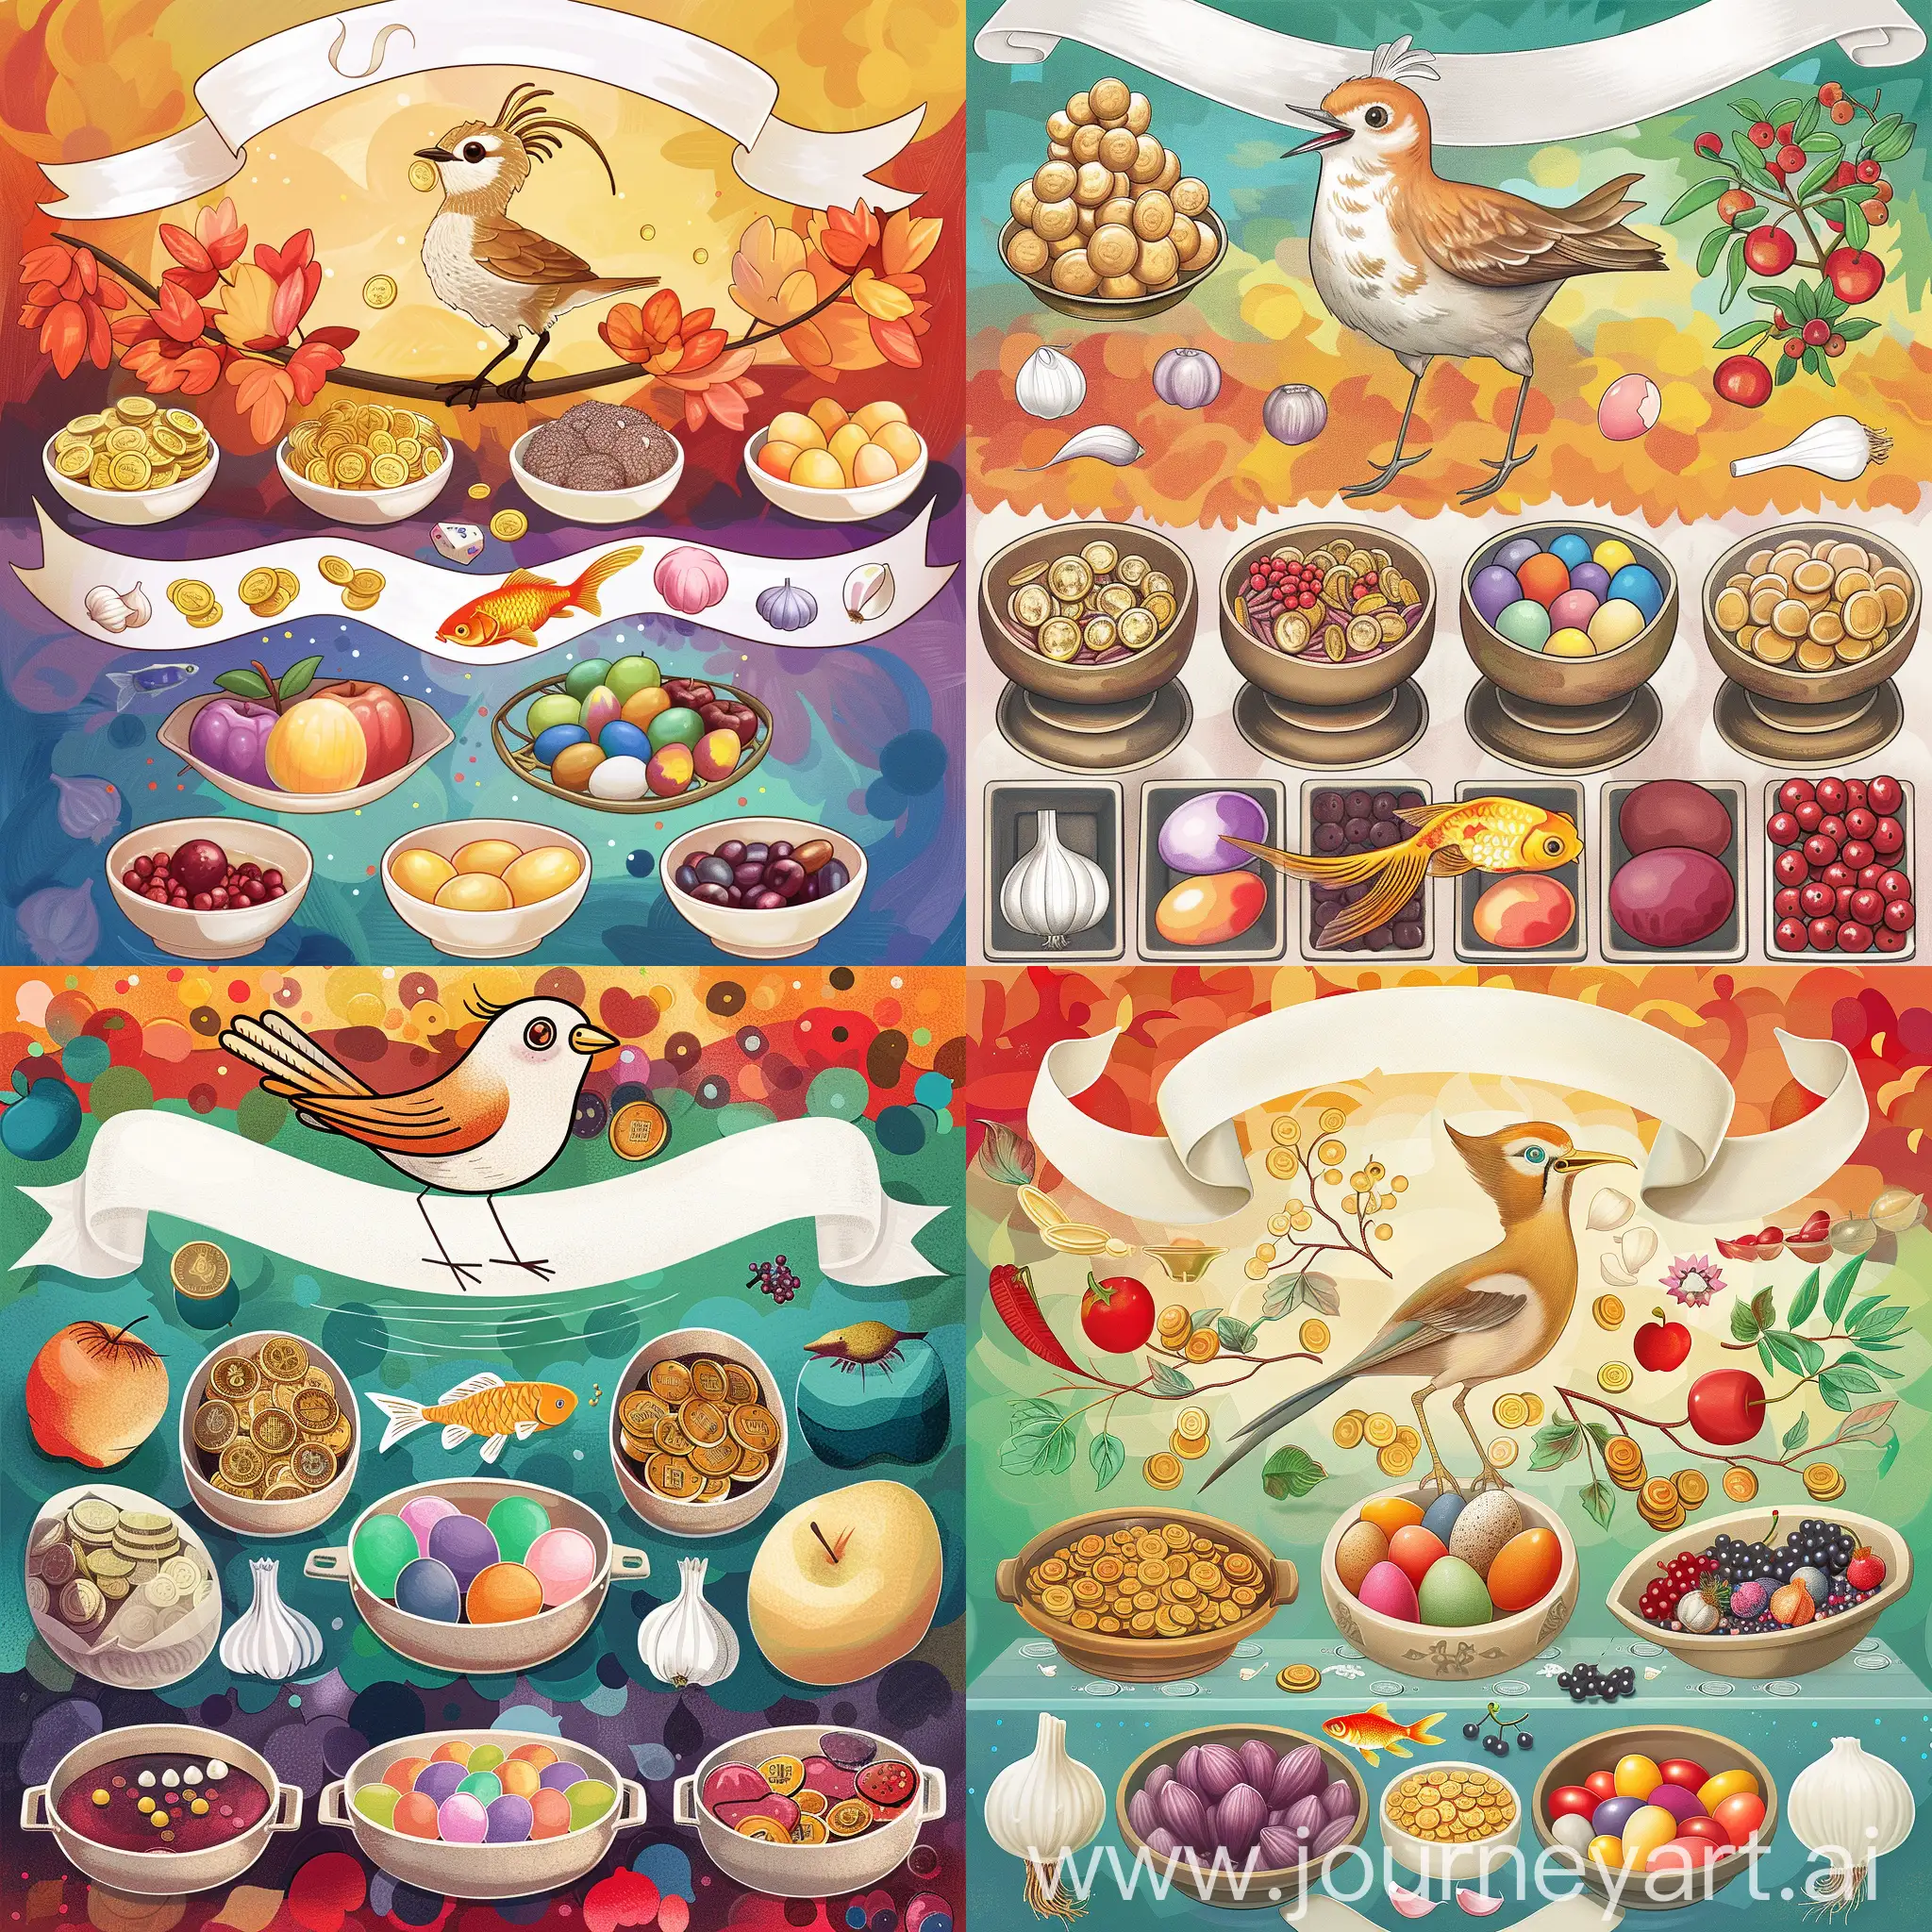 Cheerful-Cartoon-Hoopoe-Surrounded-by-Colorful-Dishes-and-Goldfish